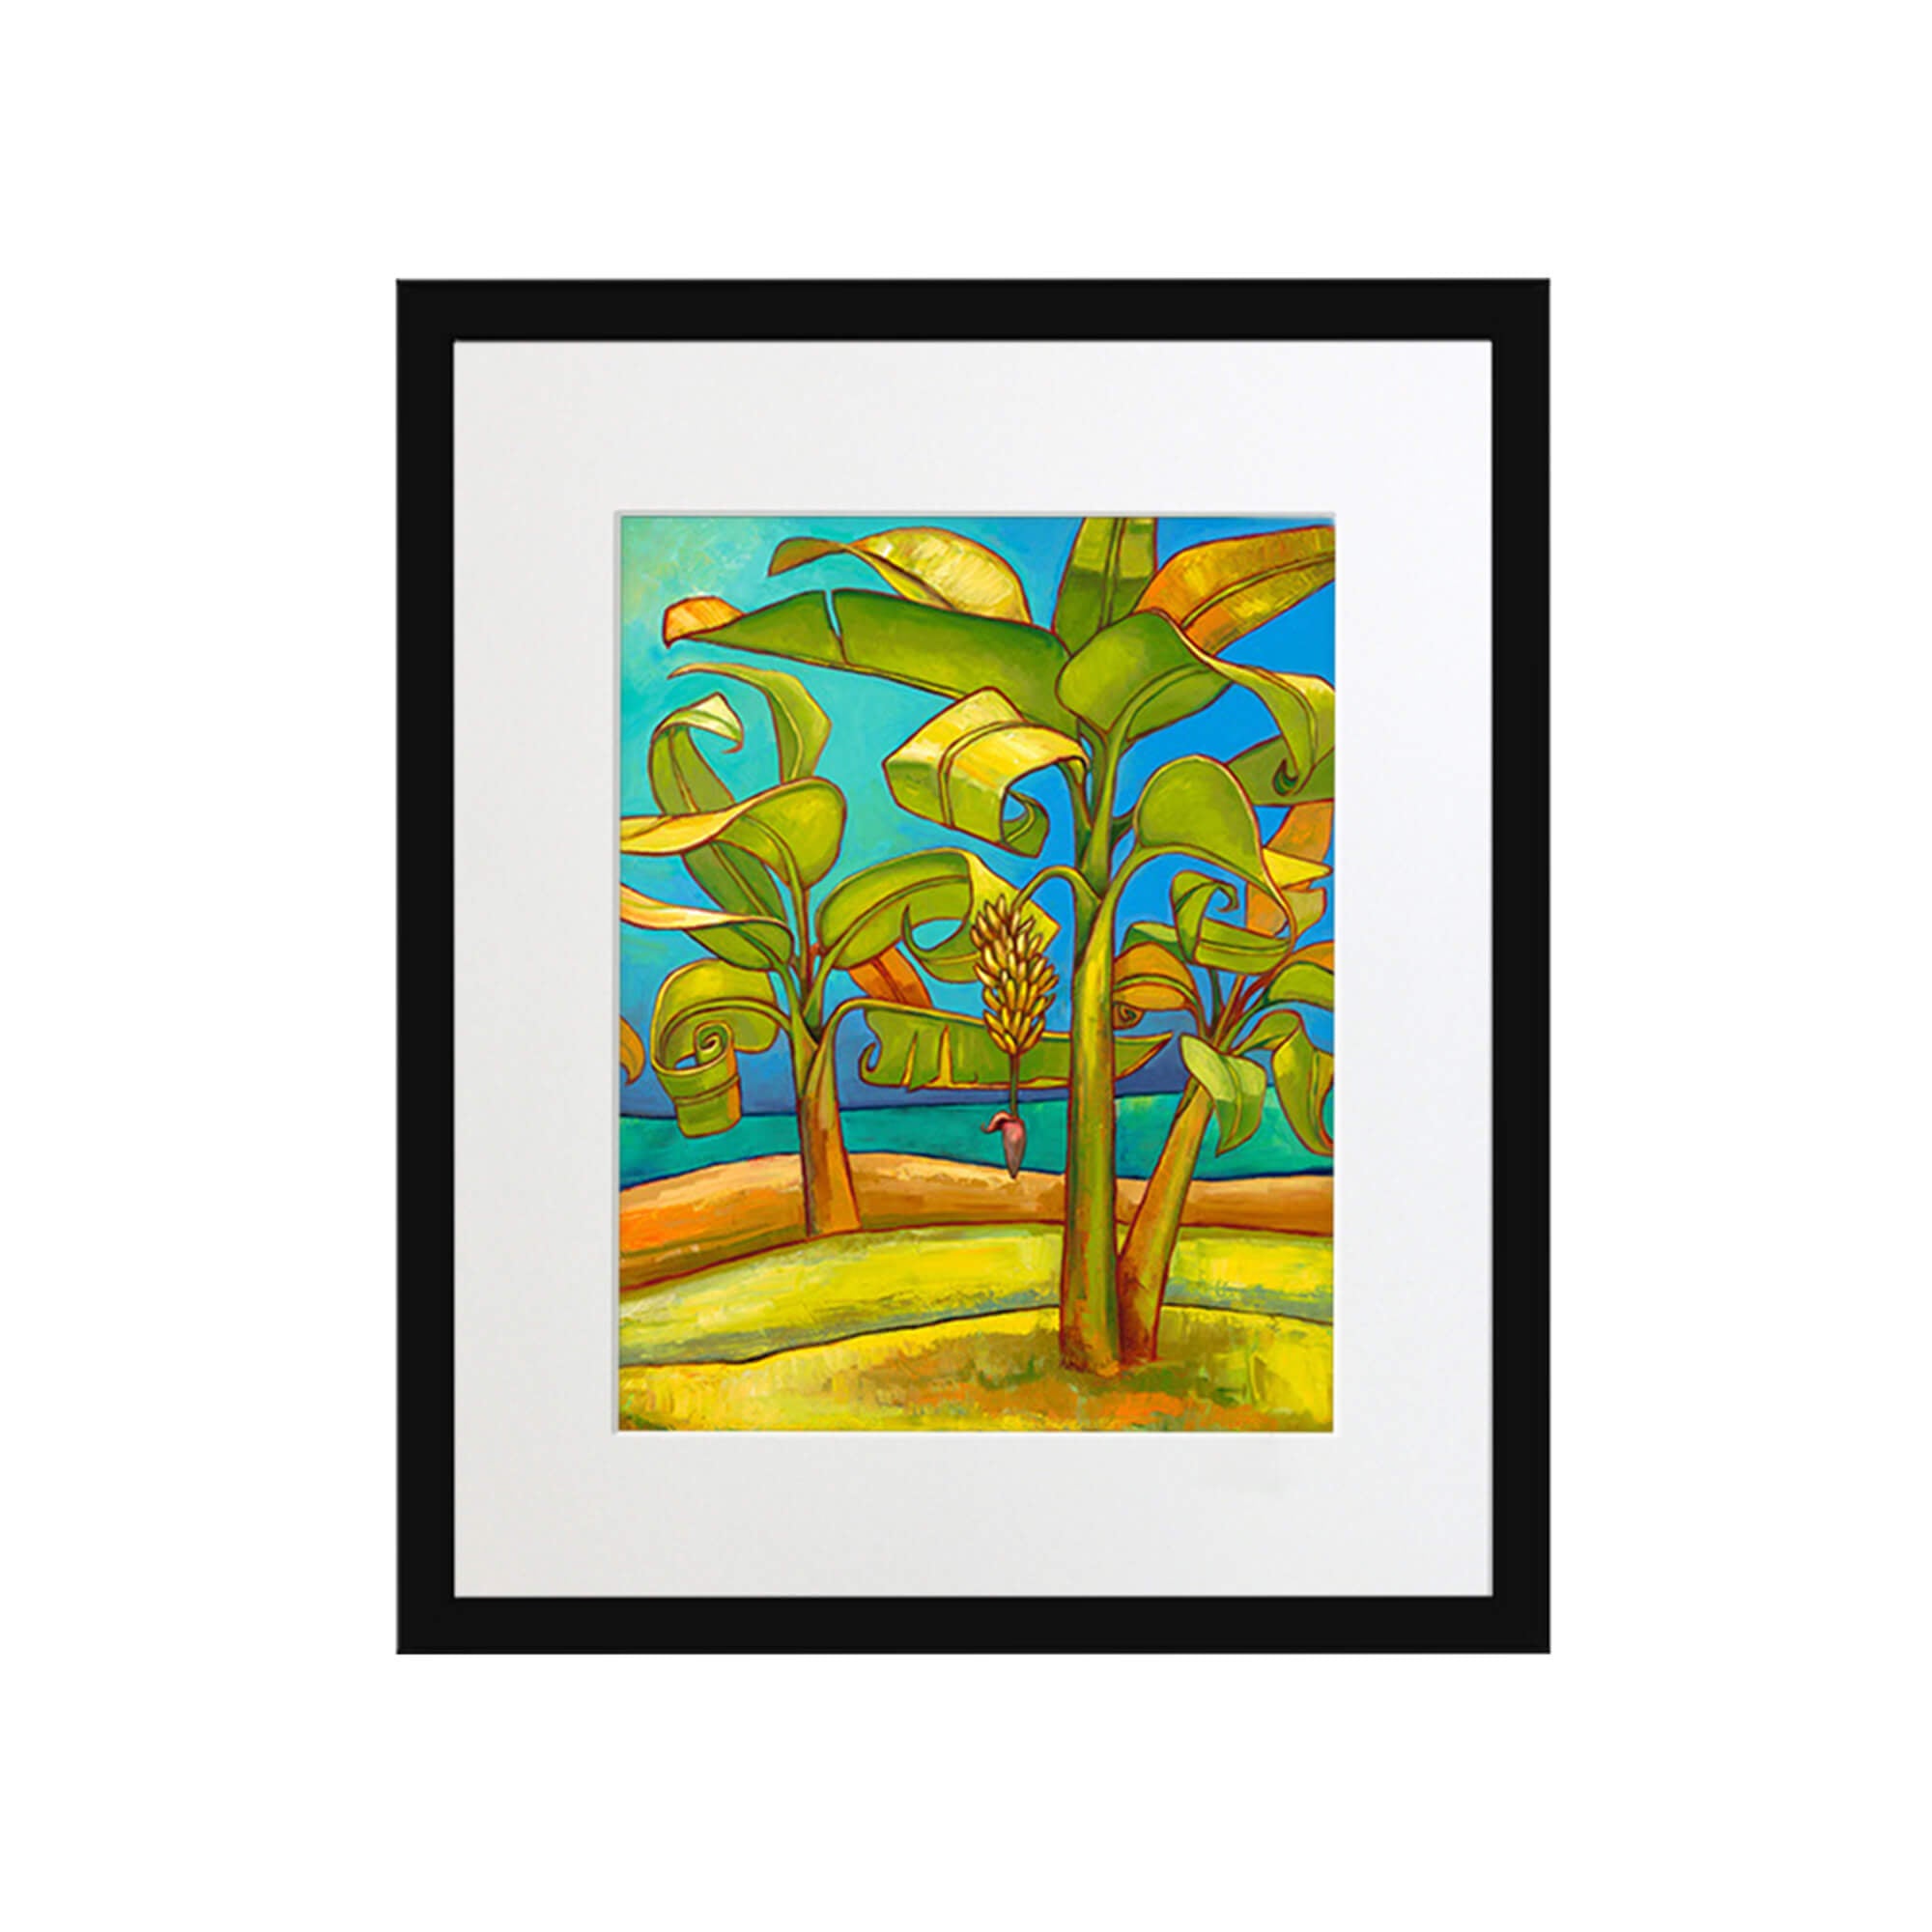 A playful depiction of banana trees by Hawaii artist Colin Redican